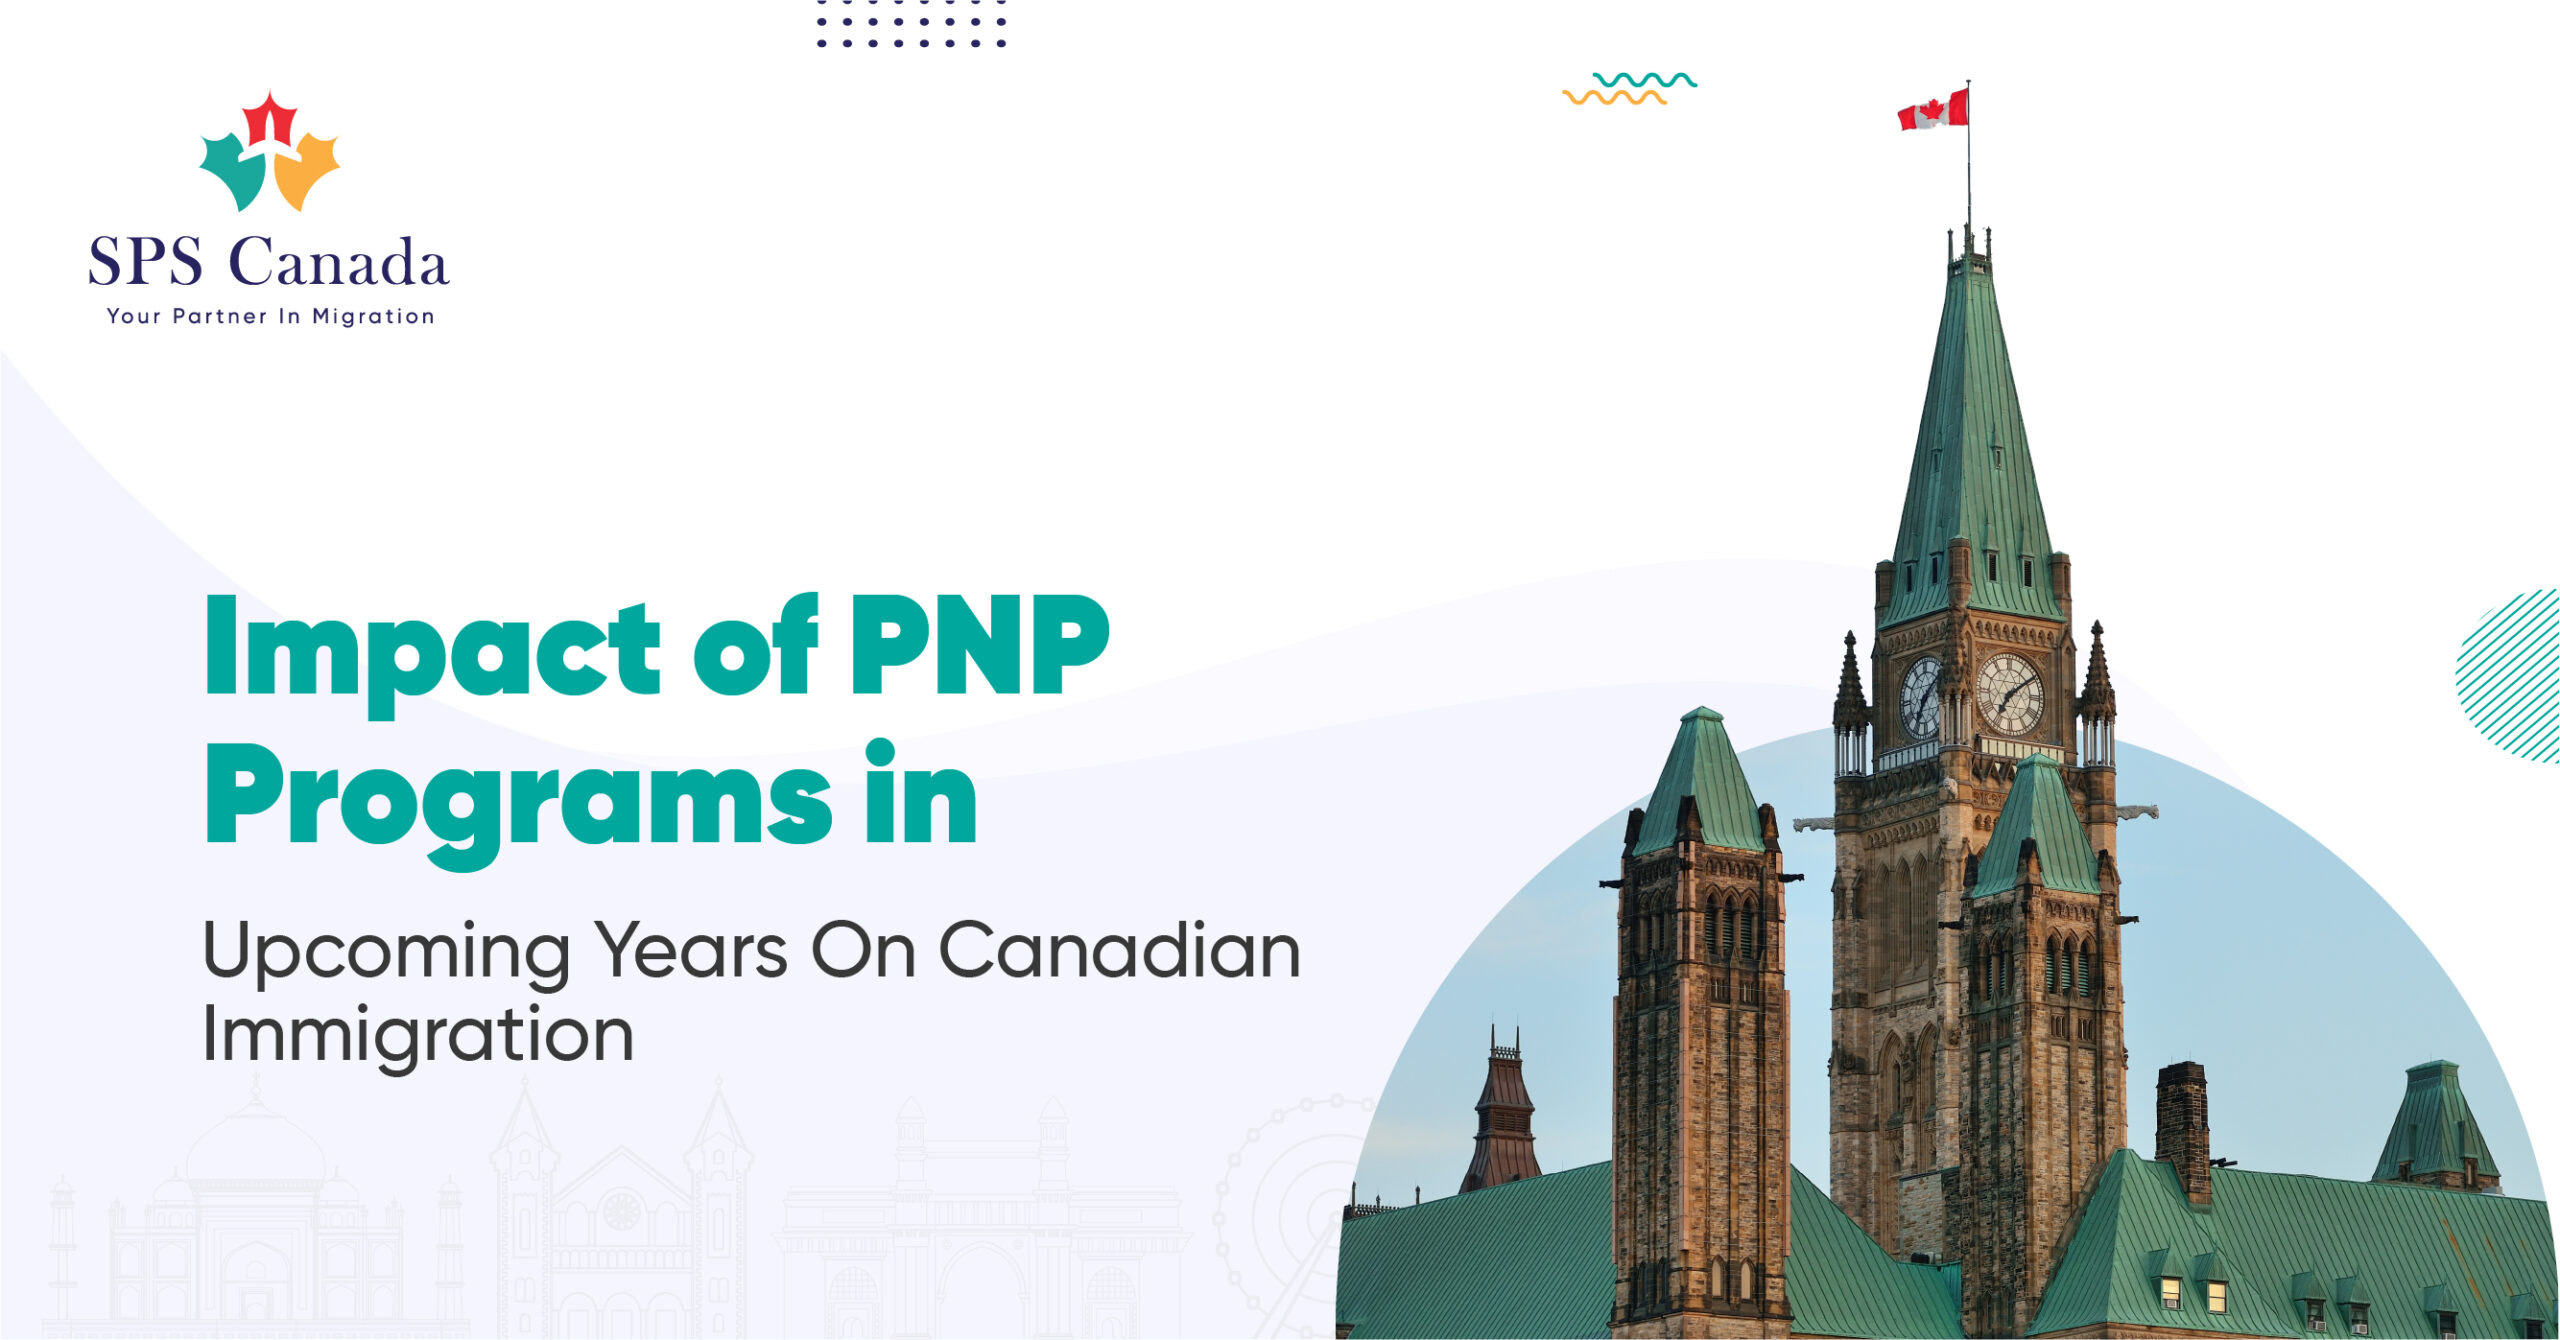 Impact of PNP Programs in upcoming years on Canadian immigration